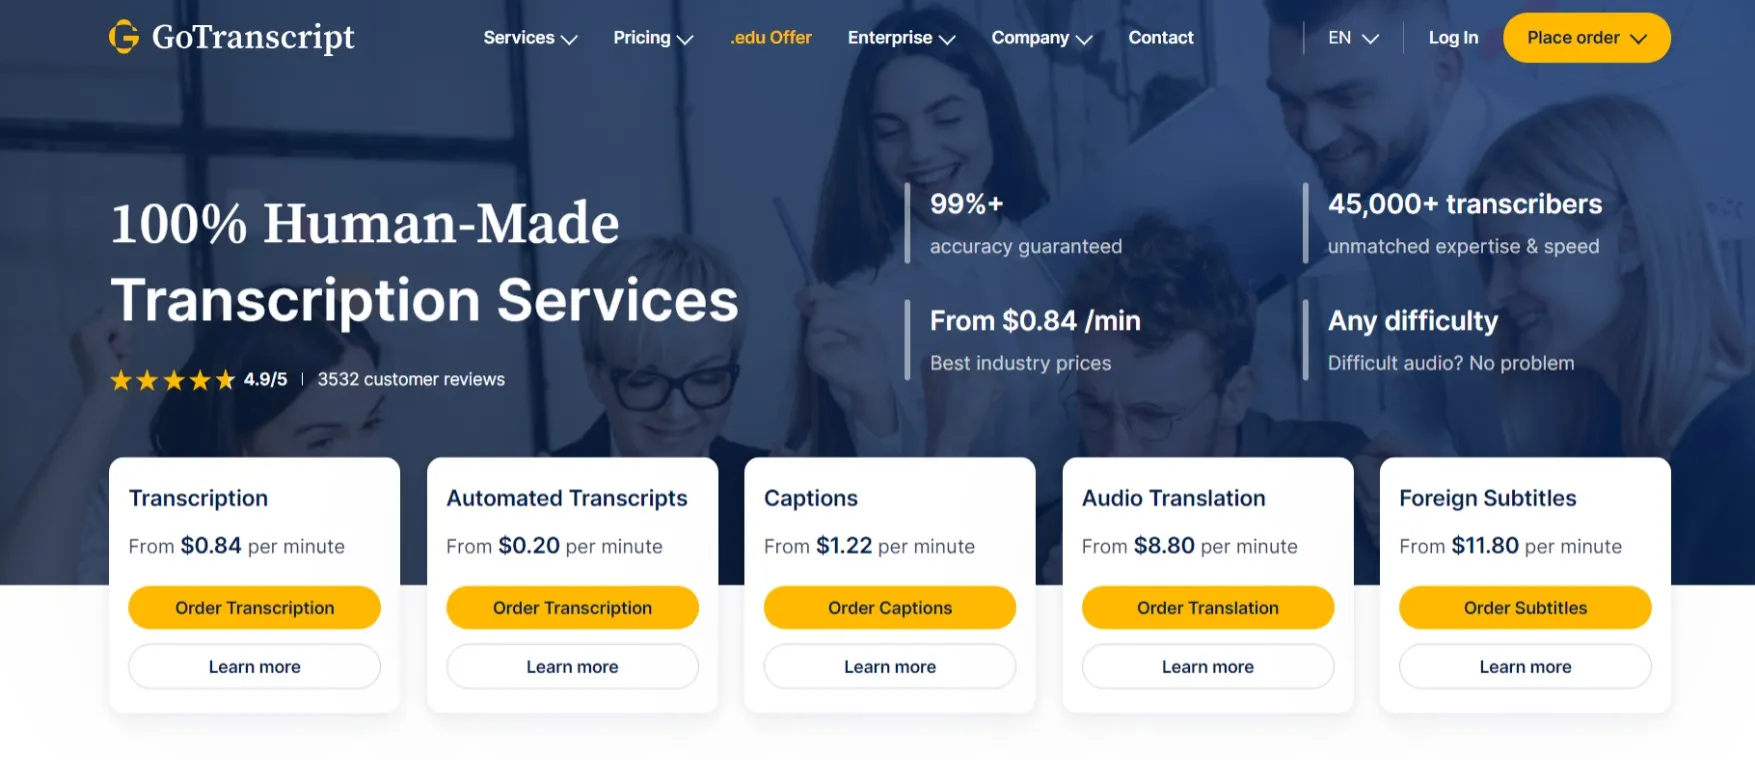 Pricing Of All The Services- GoTranscript